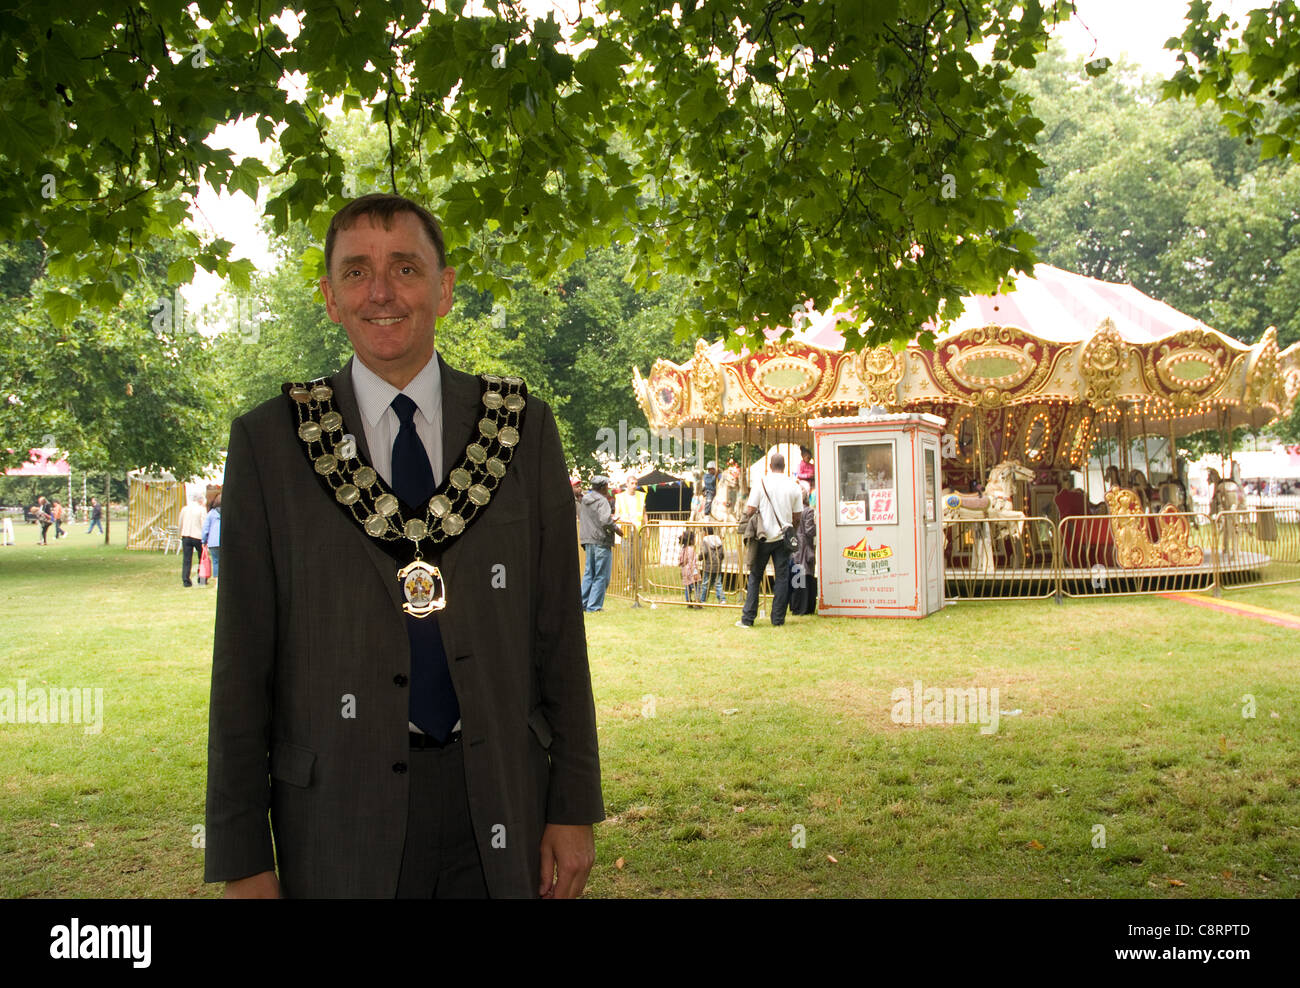 Mayor of London Borough of Newham Sir Robin Wales at Newham Town Show 2011 Stock Photo